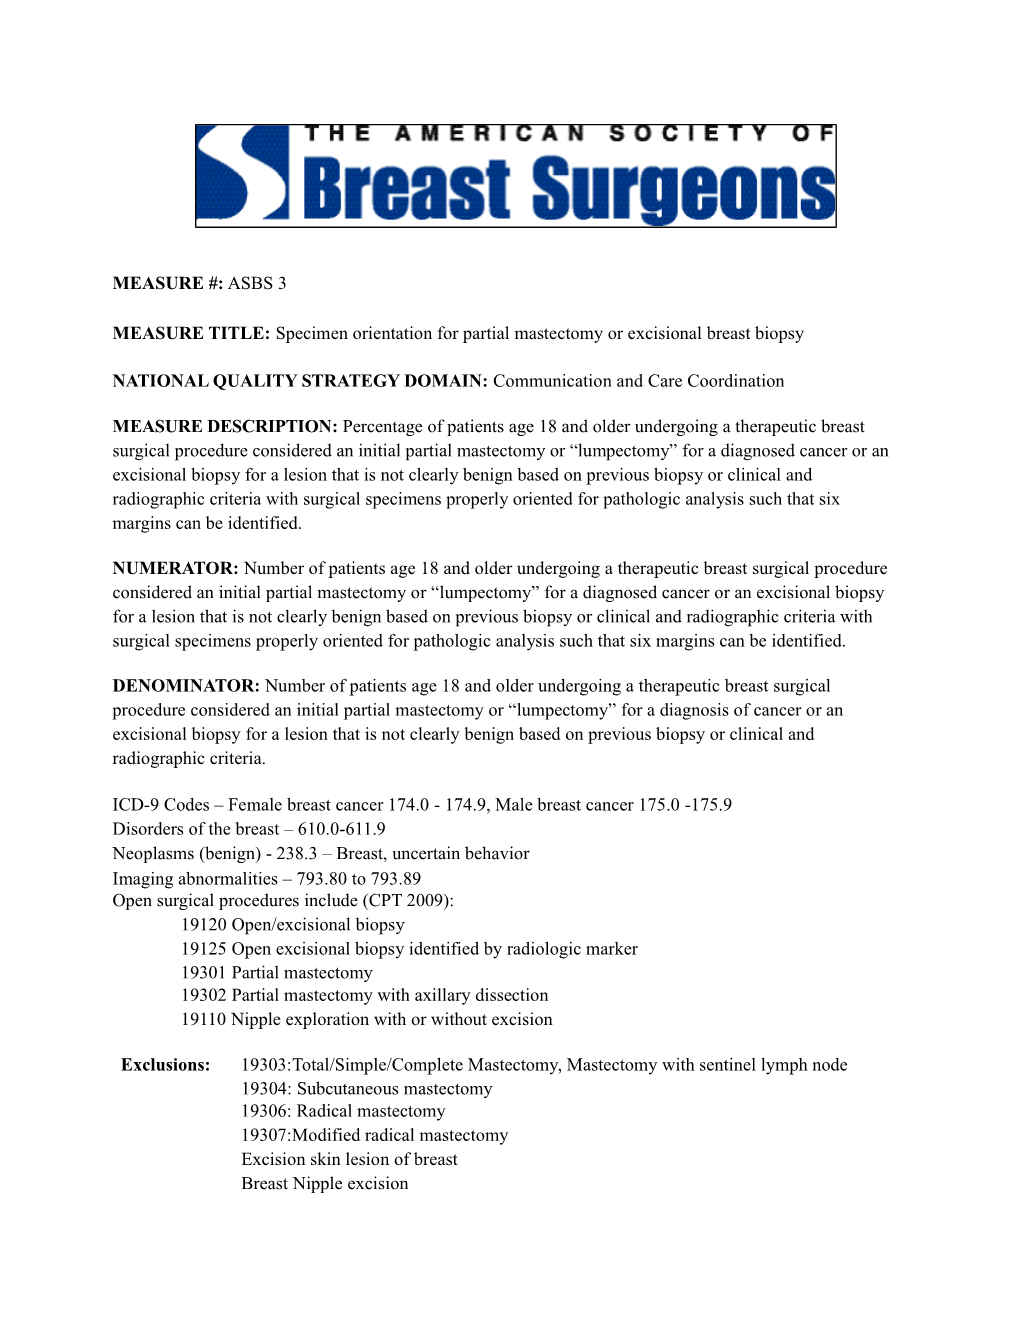 Specimen Orientation for Partial Mastectomy Or Excisional Breast Biopsy